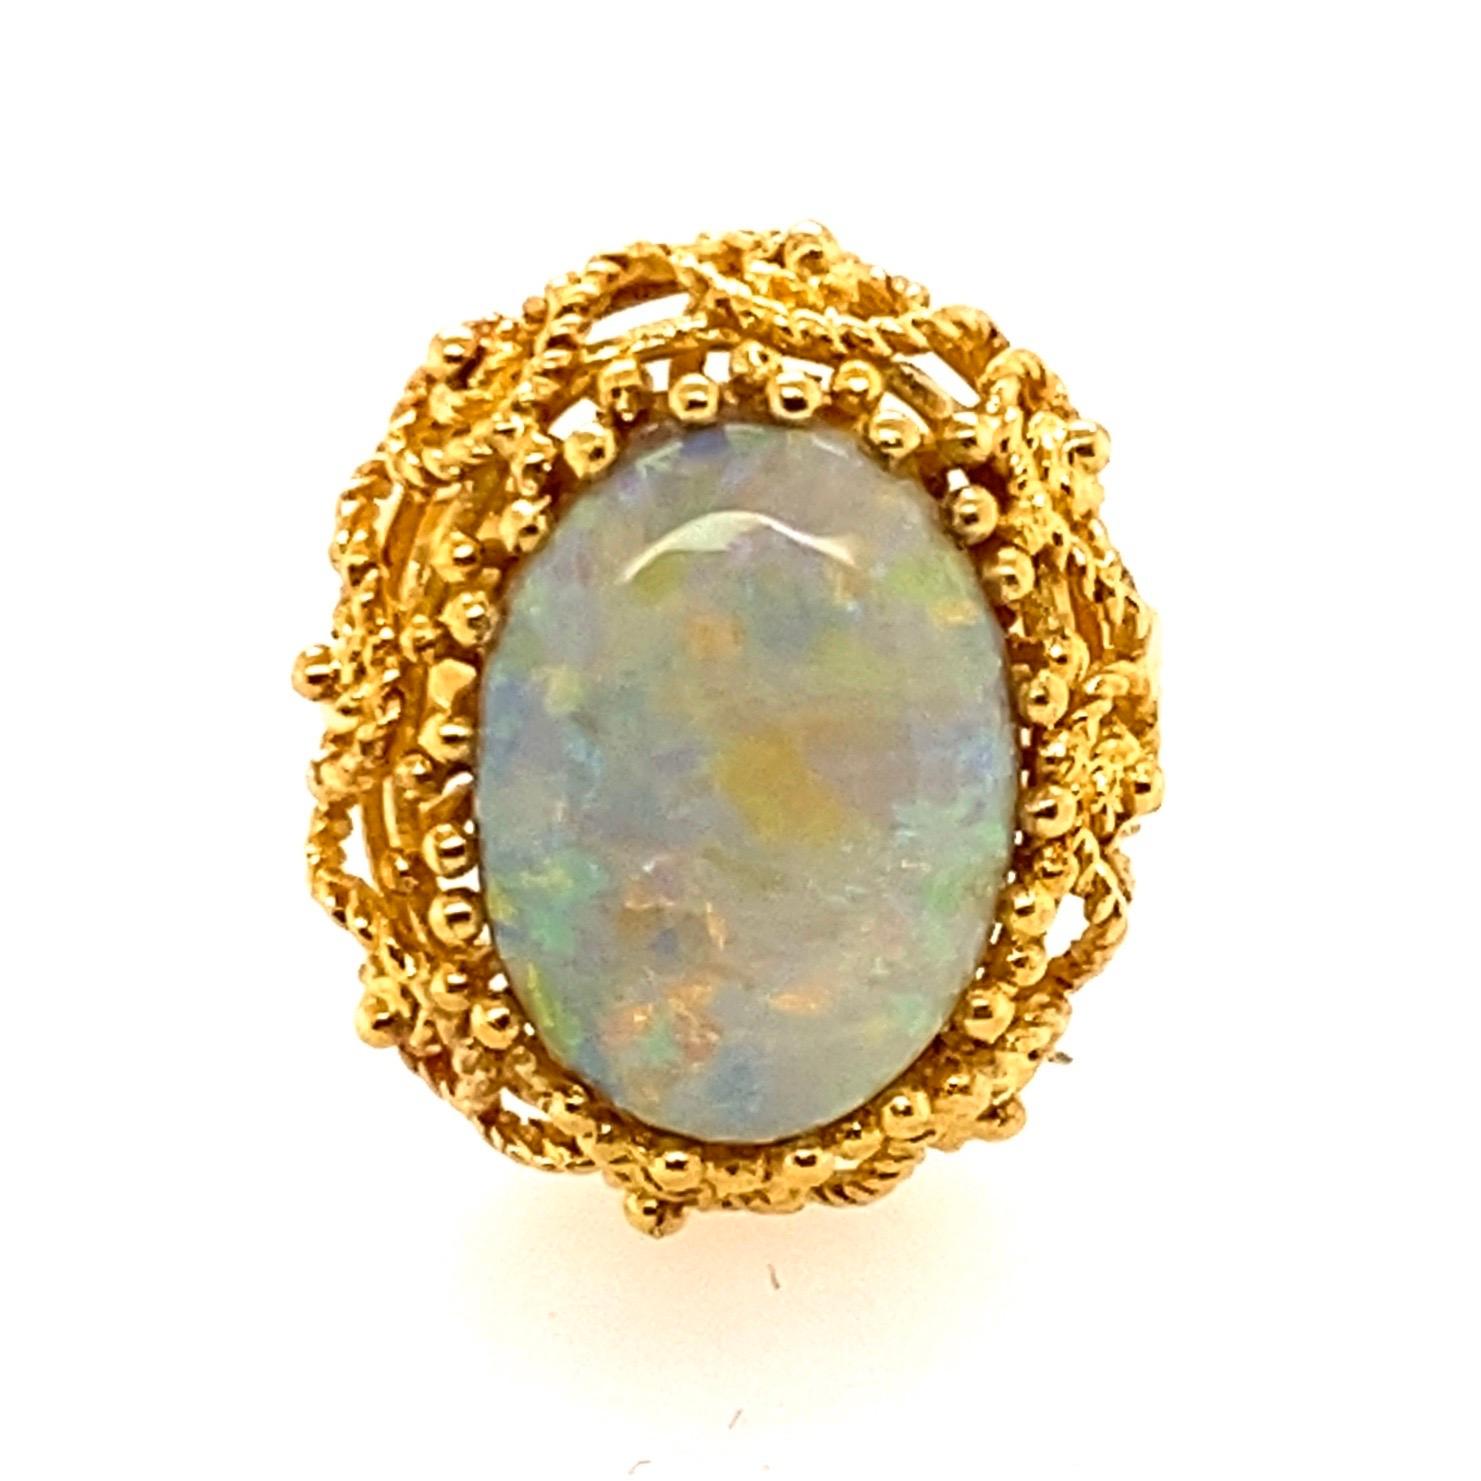 18 Karat Yellow Gold 5 Carat Australian Opal Cocktail Ring

An 18kt yellow gold cocktail ring. An intricate scroll twisted wire collet design holding a solid oval cabochon Australian opal set in a claw setting. Opal sits 10mm in height above the